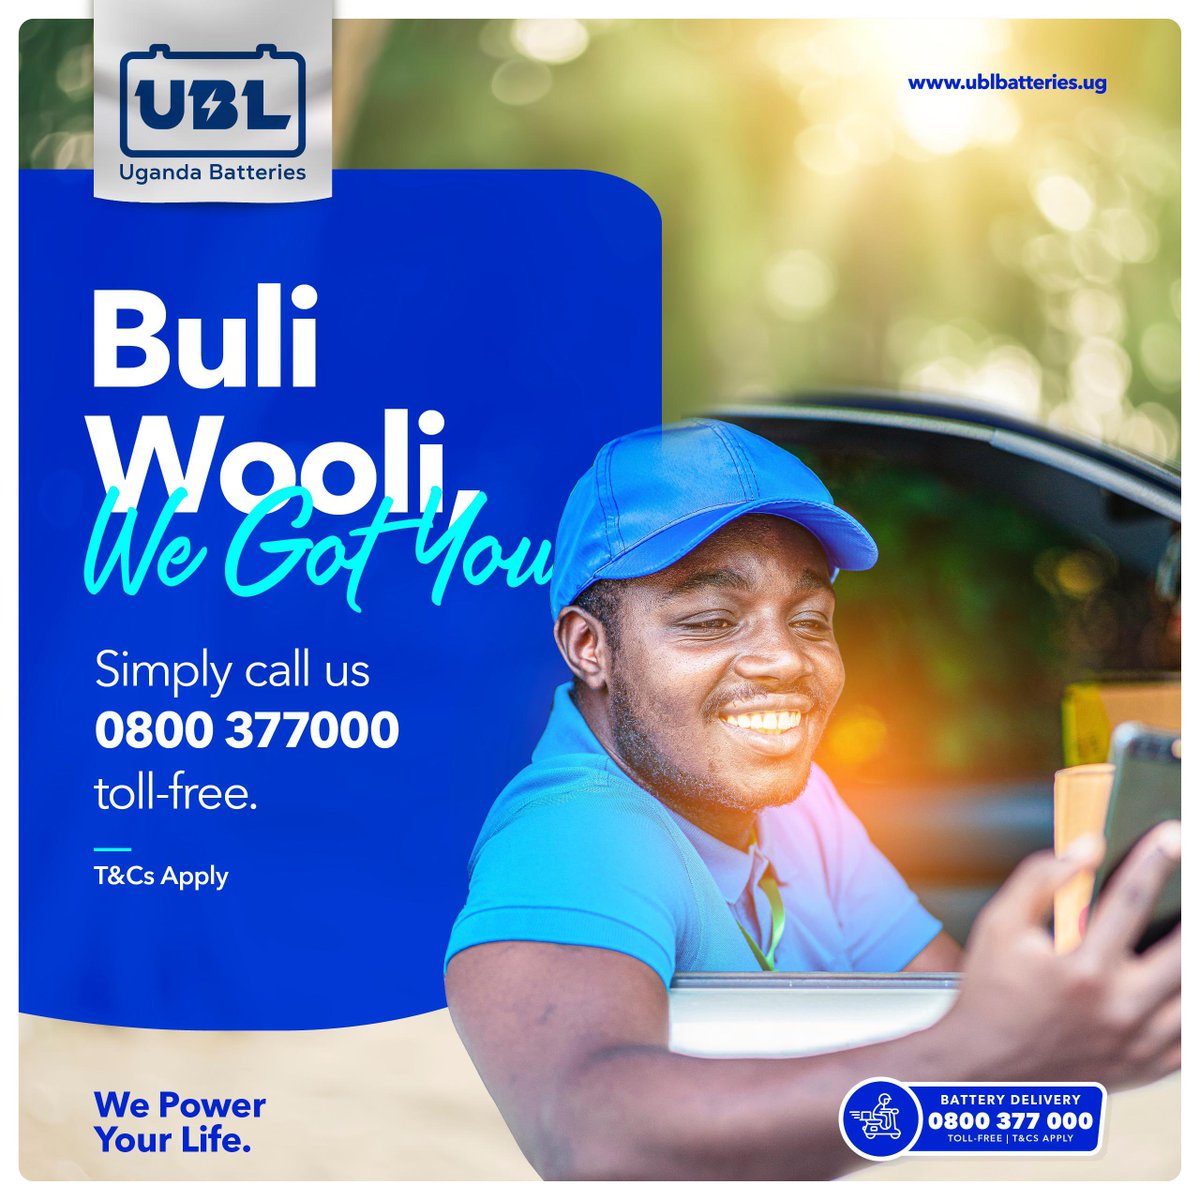 When it comes to delivering power, Uganda Batteries leads the charge.

Reach out to us toll free via 0800 377 000 & get your battery delivered in no time .

#UgandaBatteries #WepowerYourLife